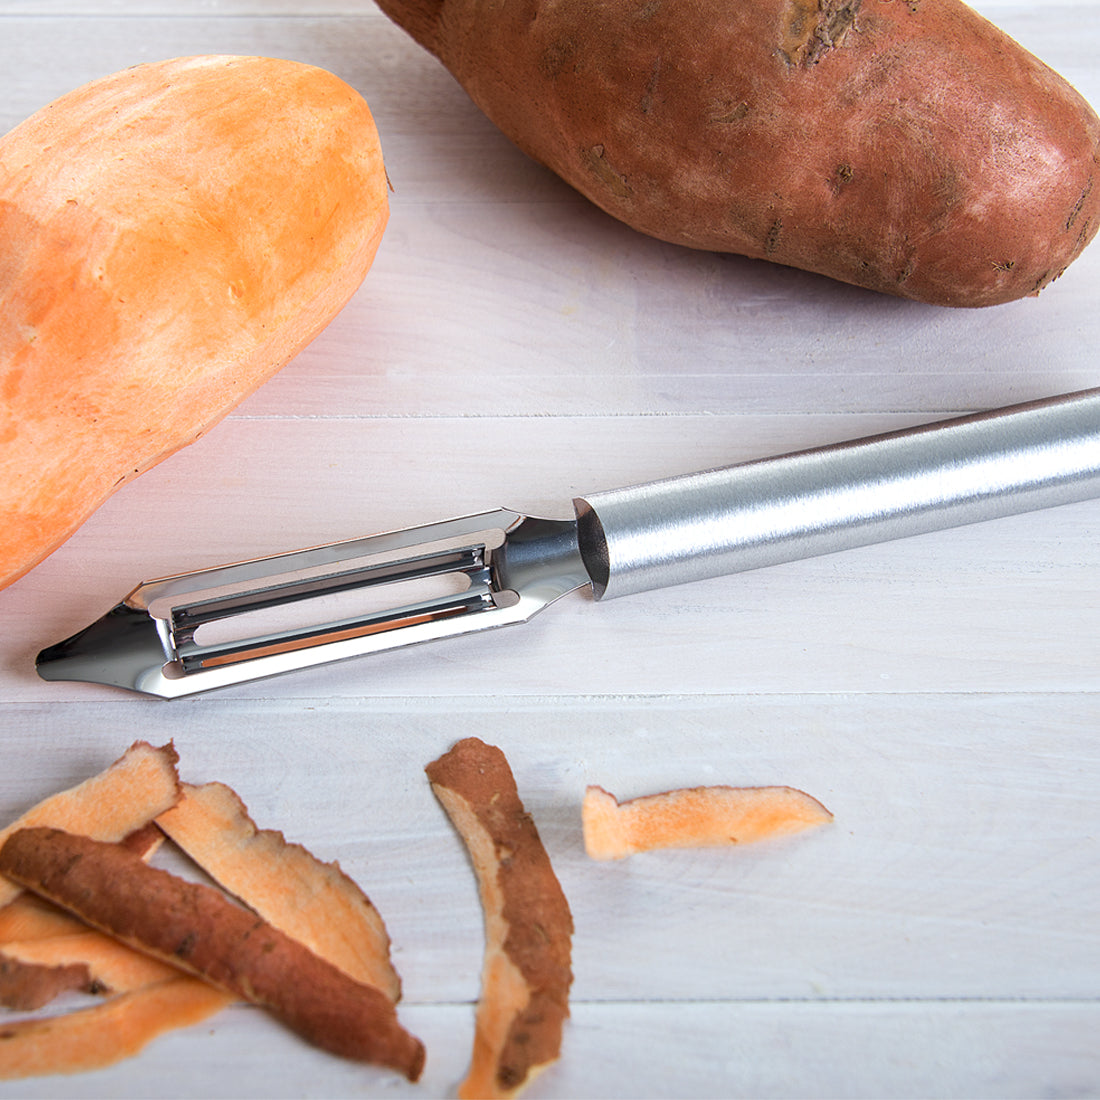 Every Kitchen in America Needs a Y-Peeler